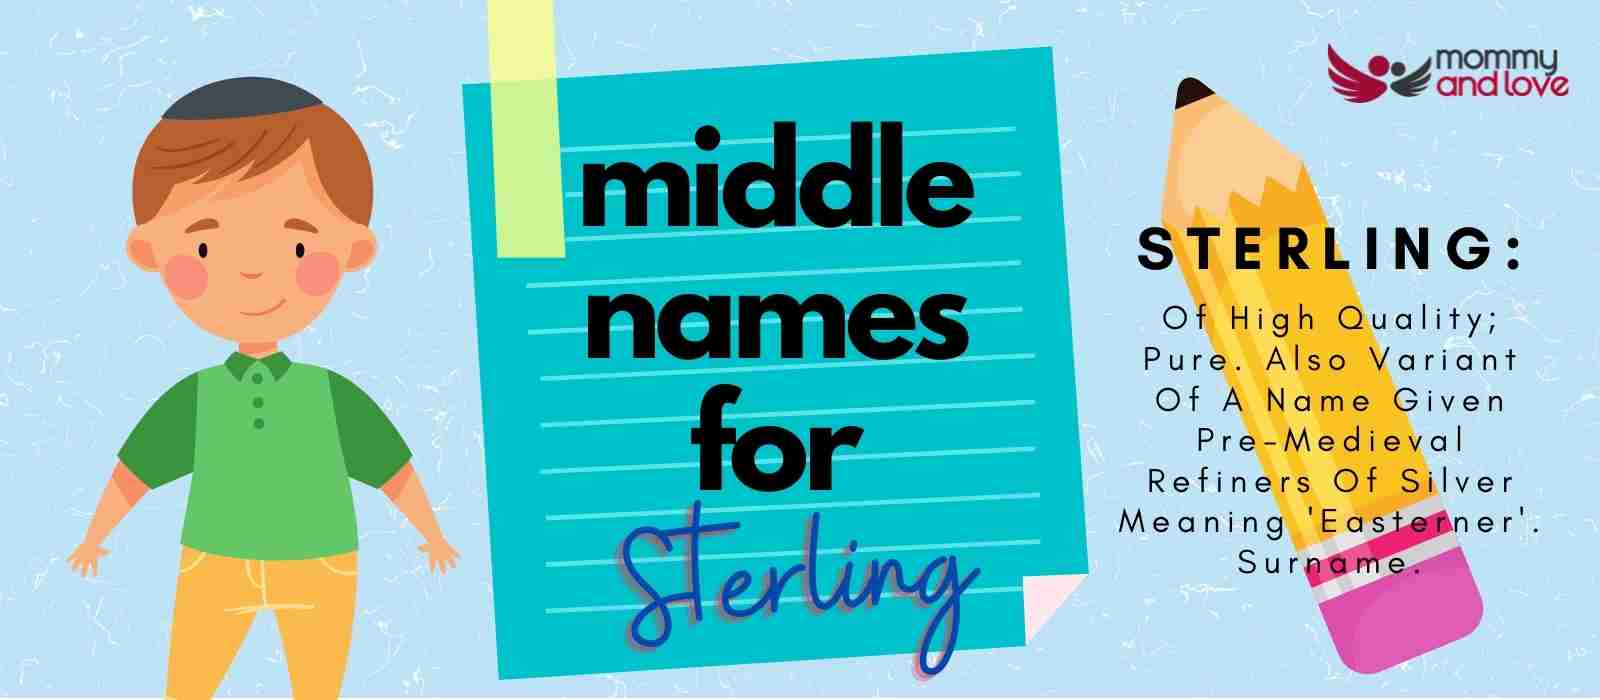 Middle Names for Sterling